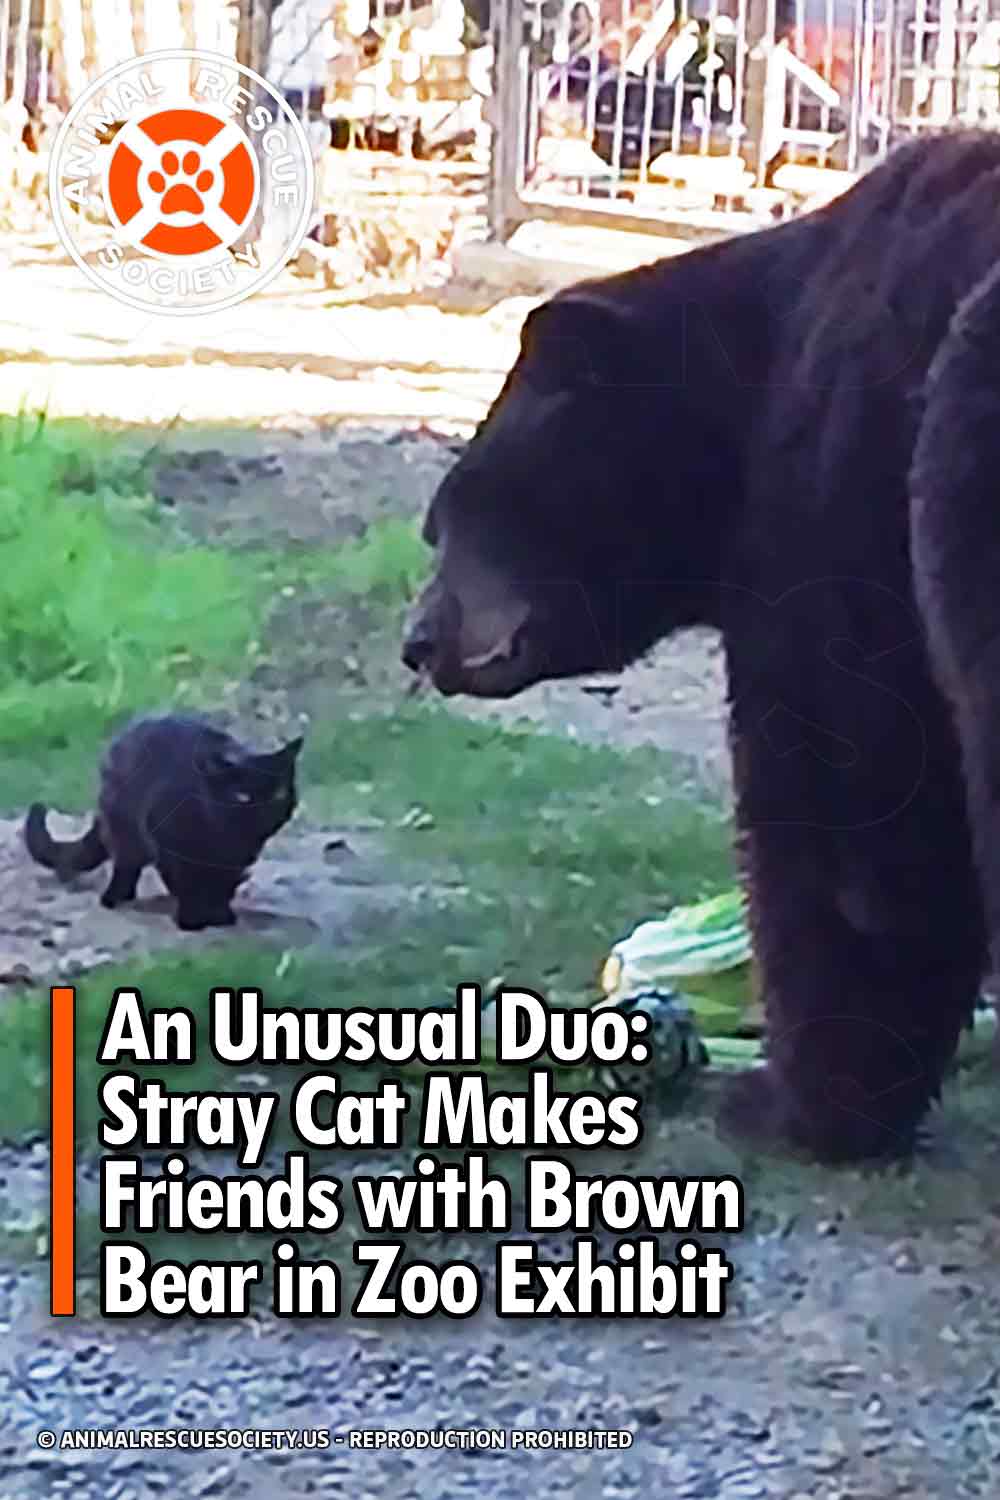 An Unusual Duo: Stray Cat Makes Friends with Brown Bear in Zoo Exhibit